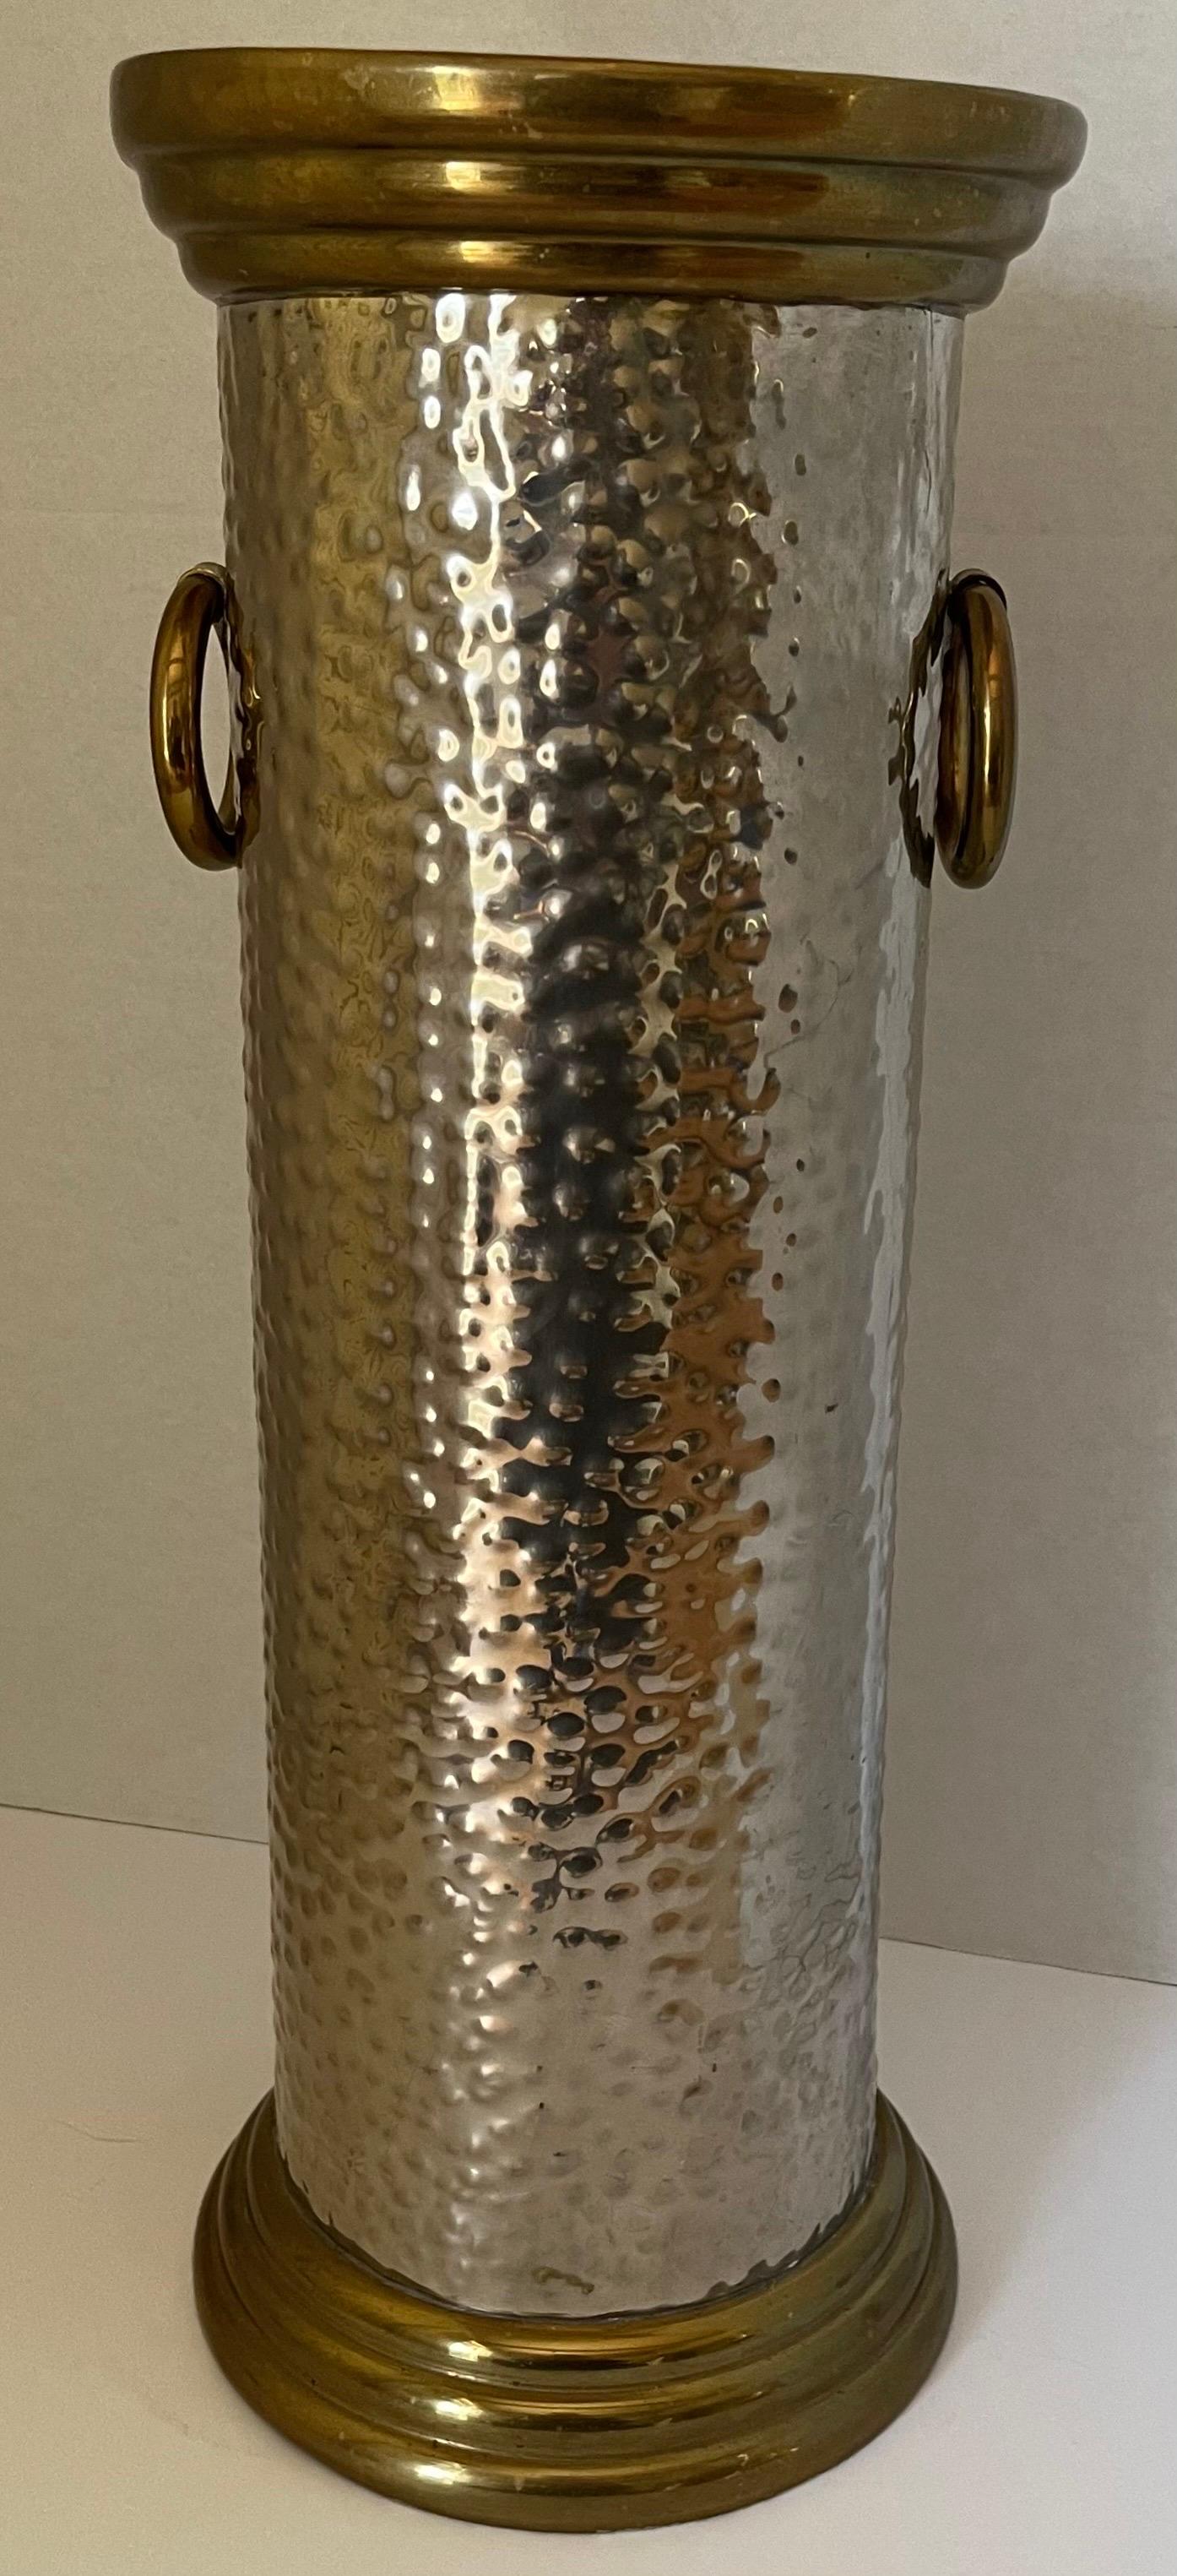 Hammered silver metal and brass tall umbrella stand. As found unpolished condition. 